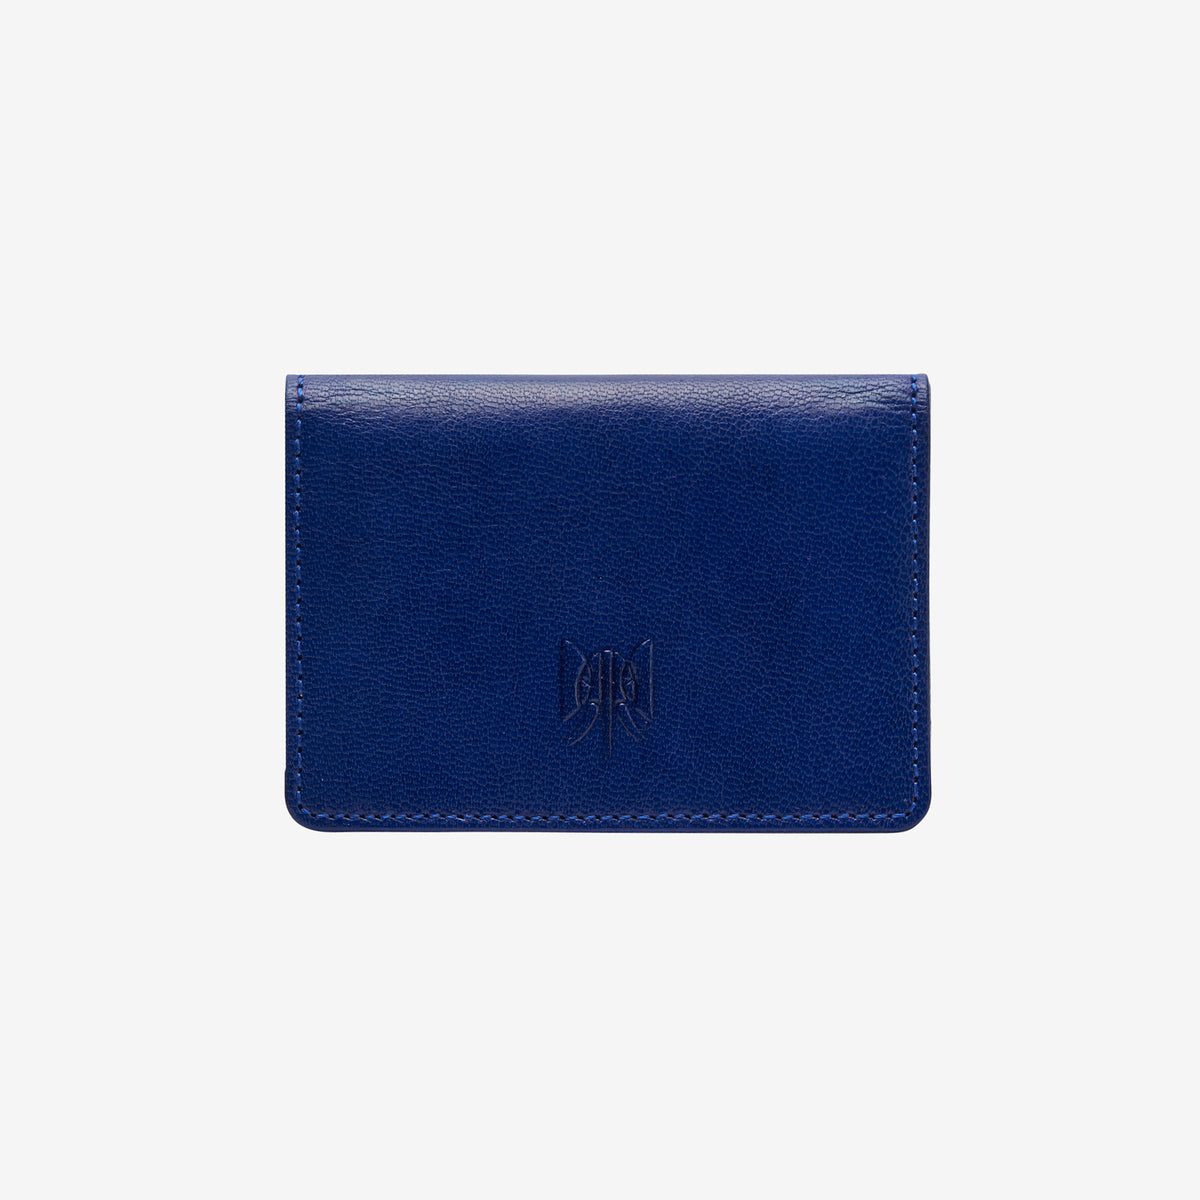     tusk-138-womens-siam-leather-gusseted-card-case-indigo-and-french-blue-front